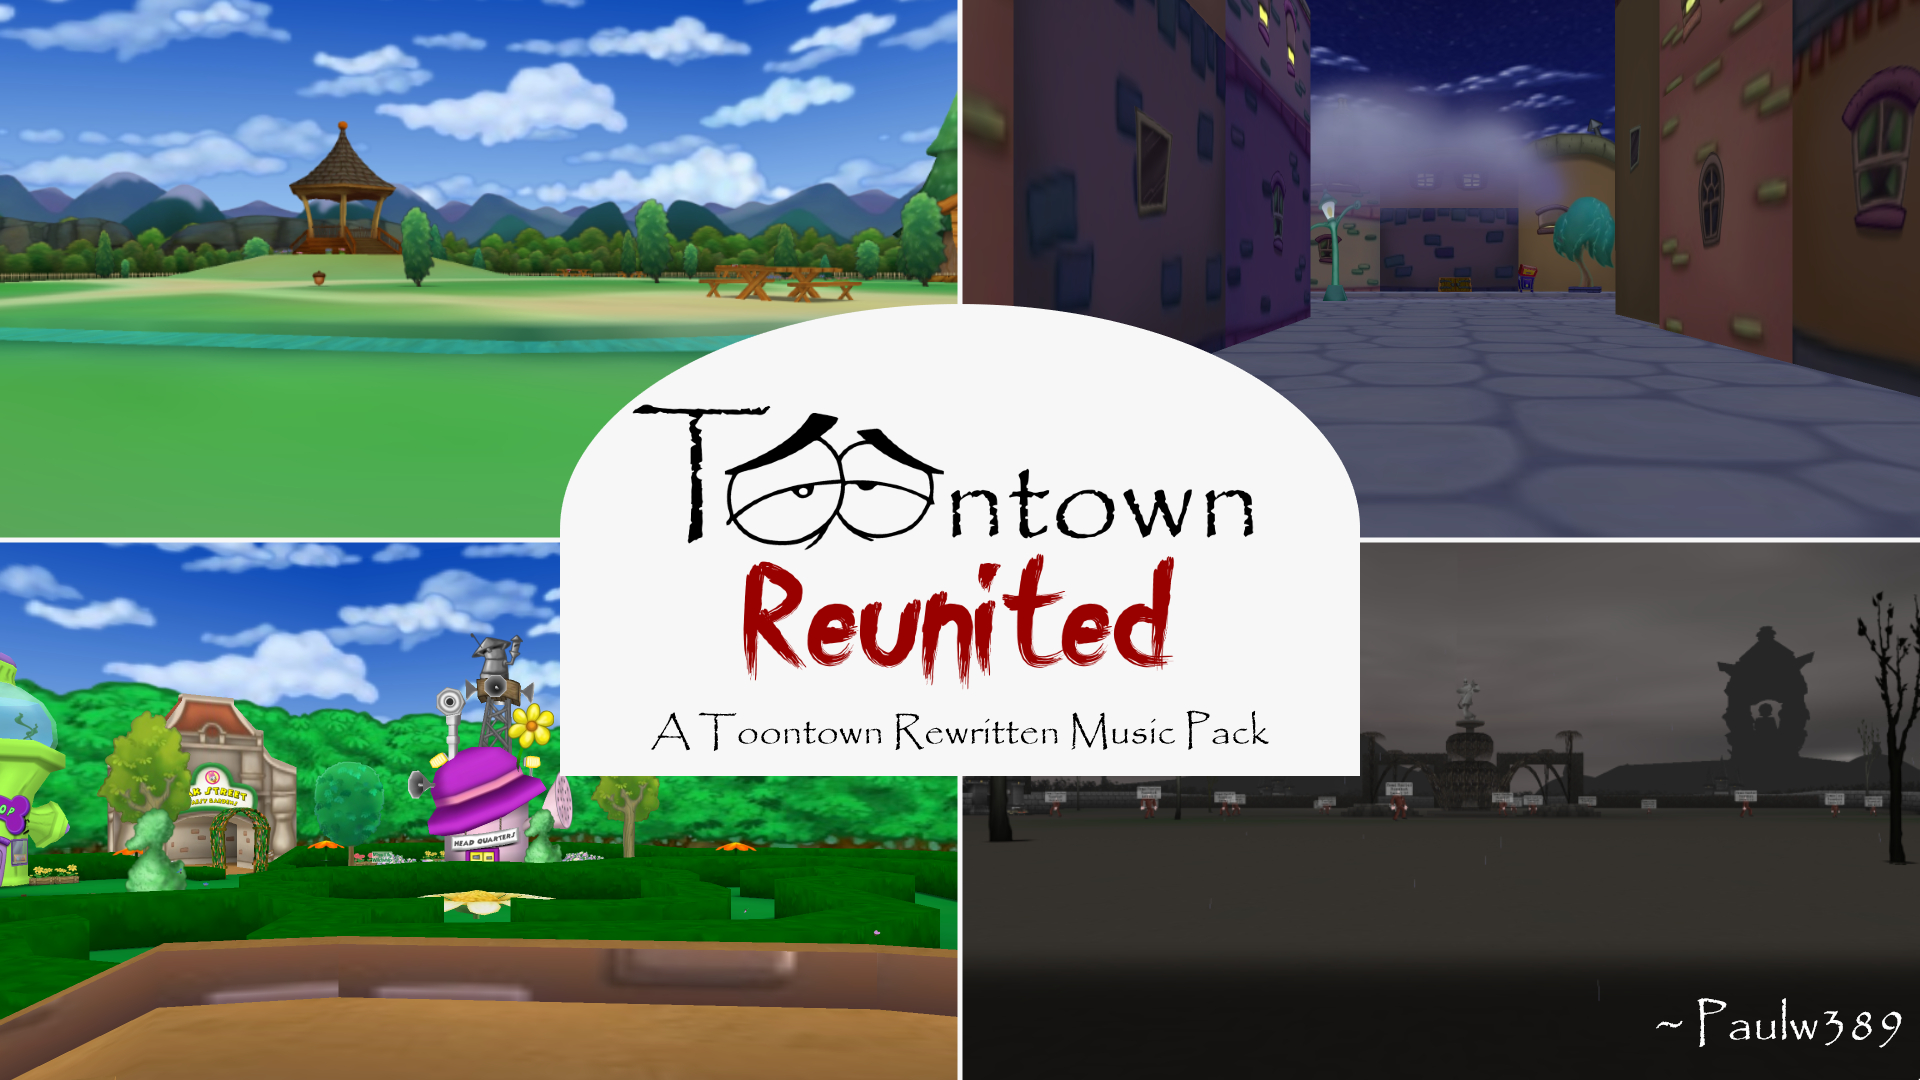 Toontown Reunited logo centered with locations of Toontown surrounding the logo